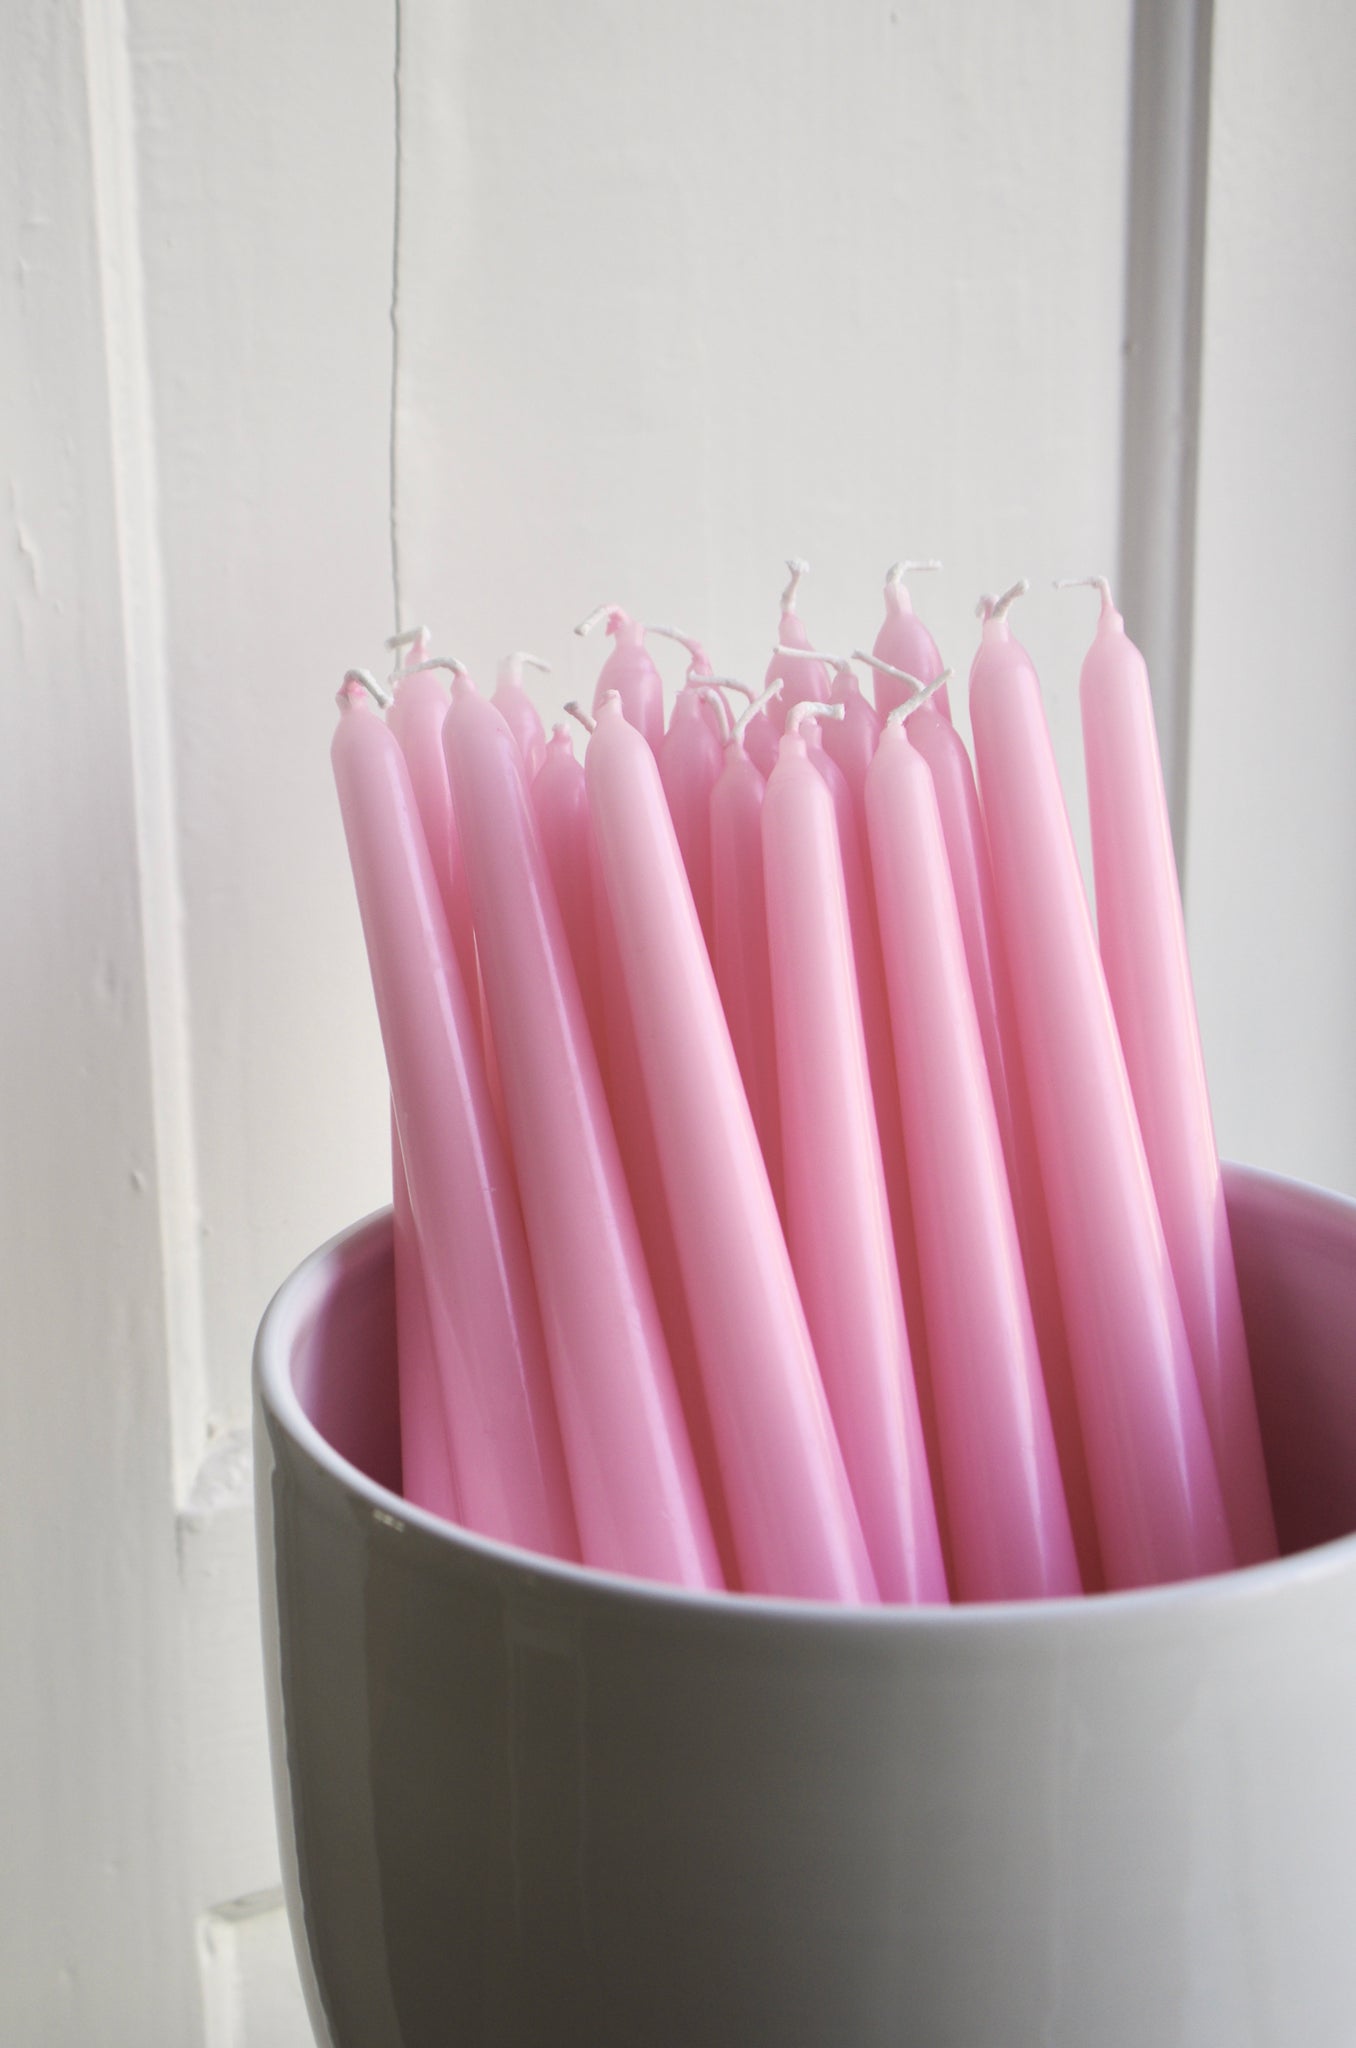 Tapered candles, pink, set of 3